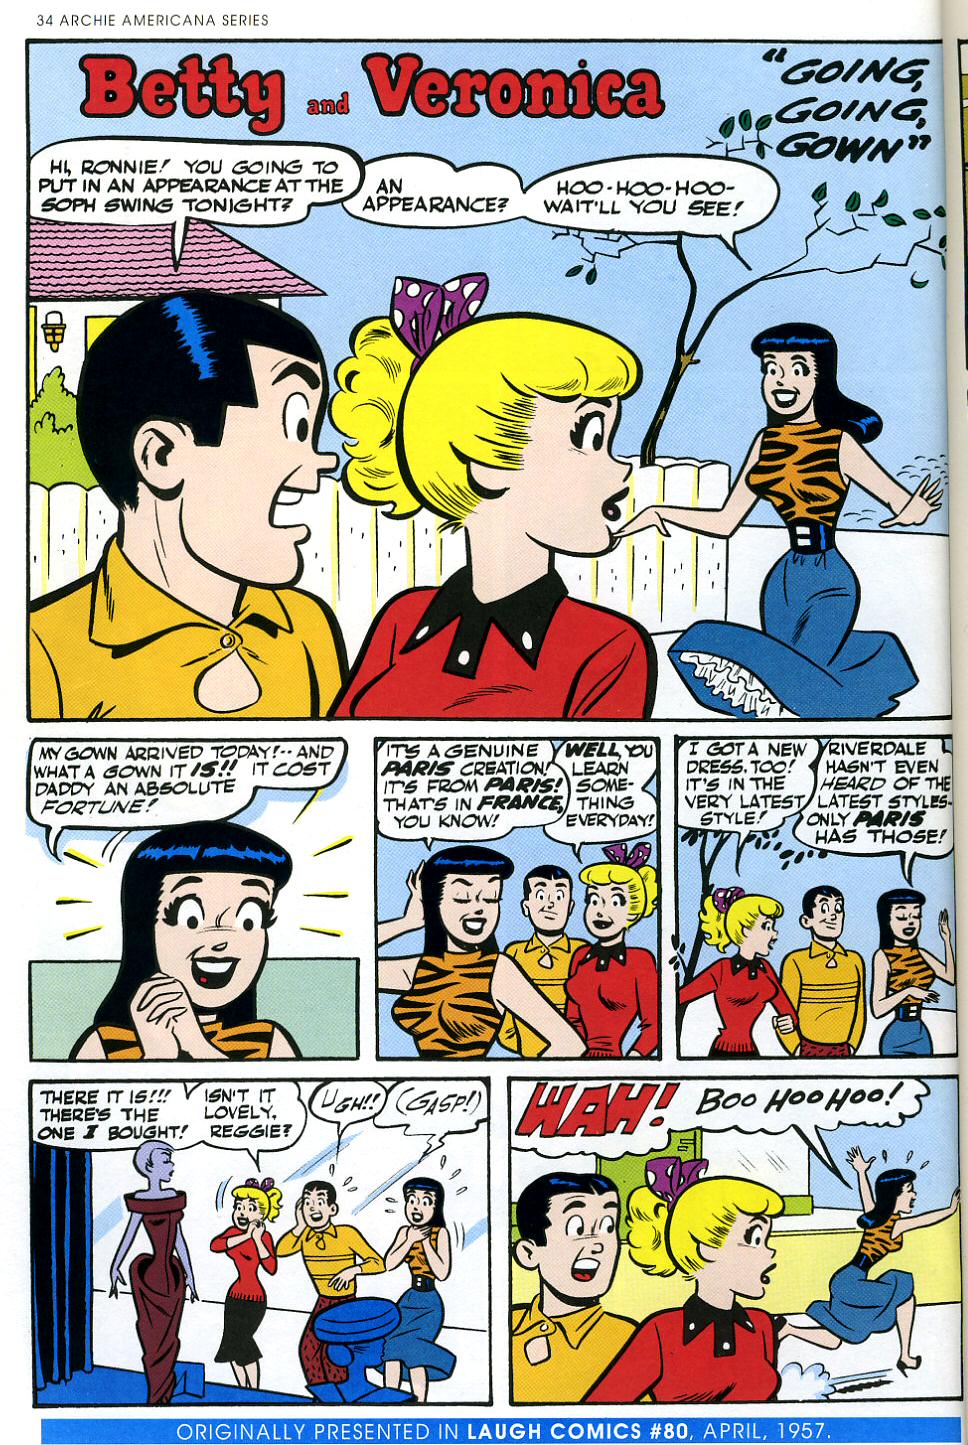 Read online Archie Americana Series comic -  Issue # TPB 2 - 36